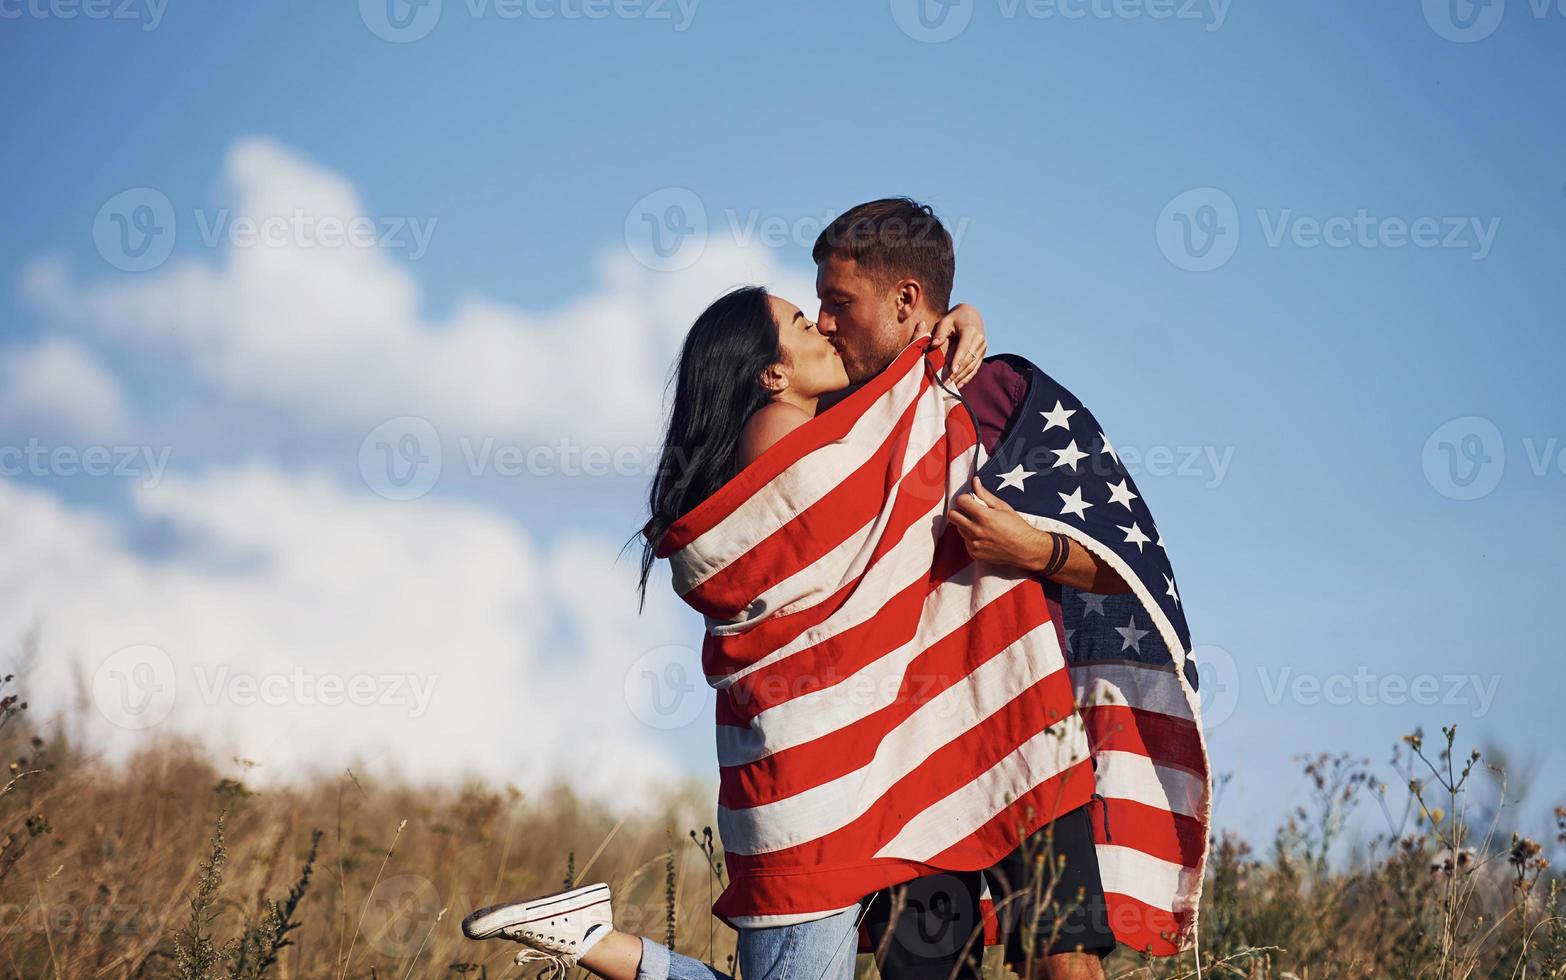 Kissing each other. Feels freedom. Beautiful couple with American Flag have a good time outdoors in the field photo